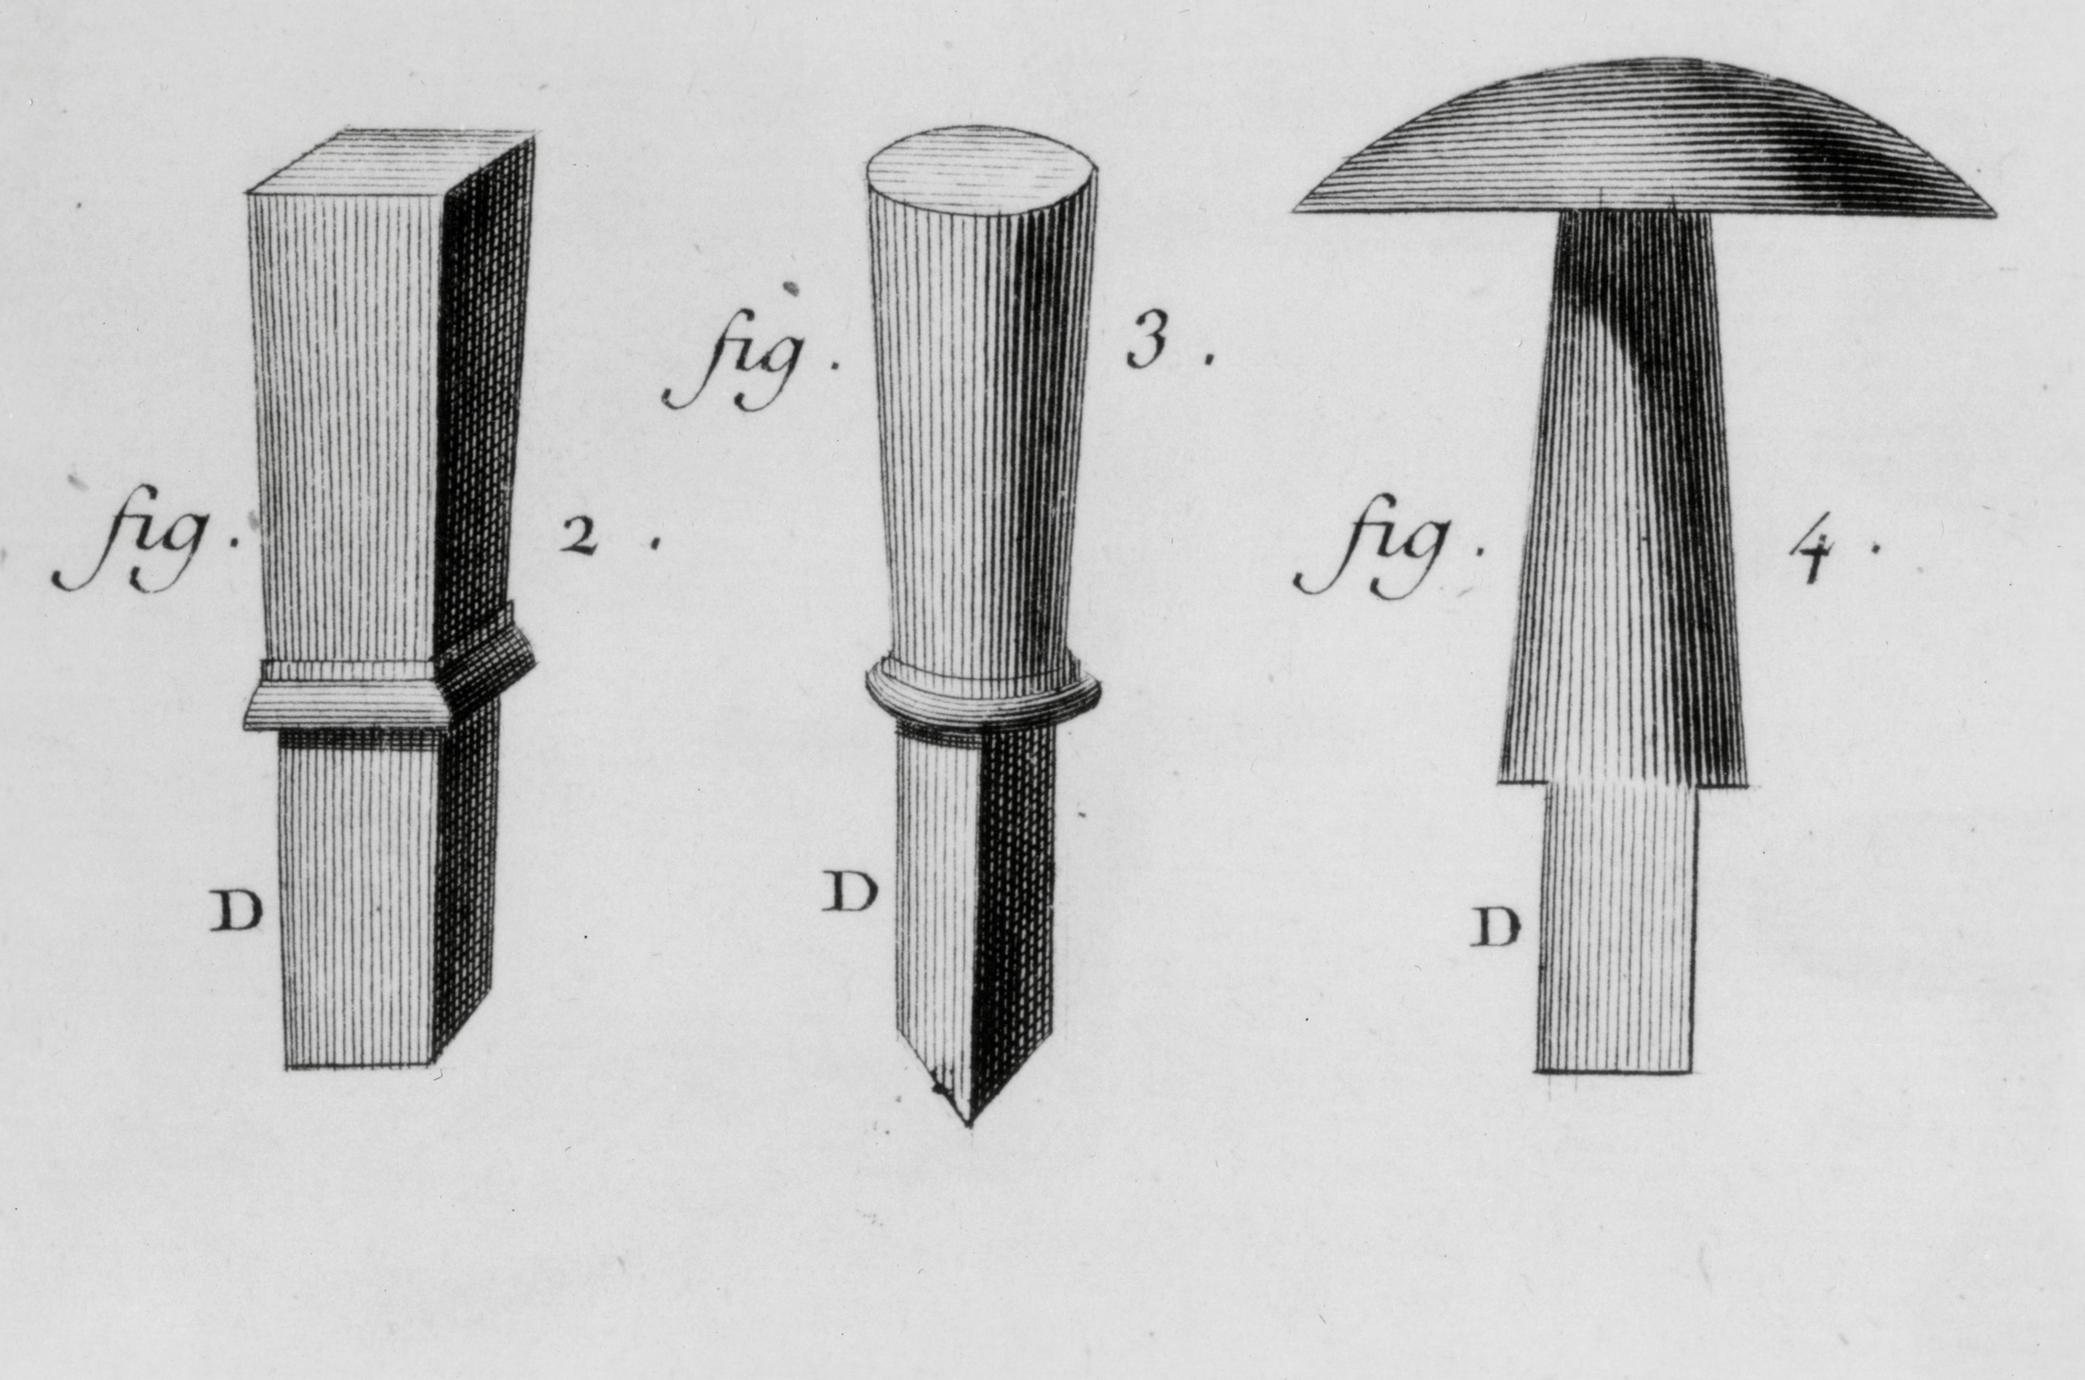 = Black and white photograph of hand anvils or watch stakes.